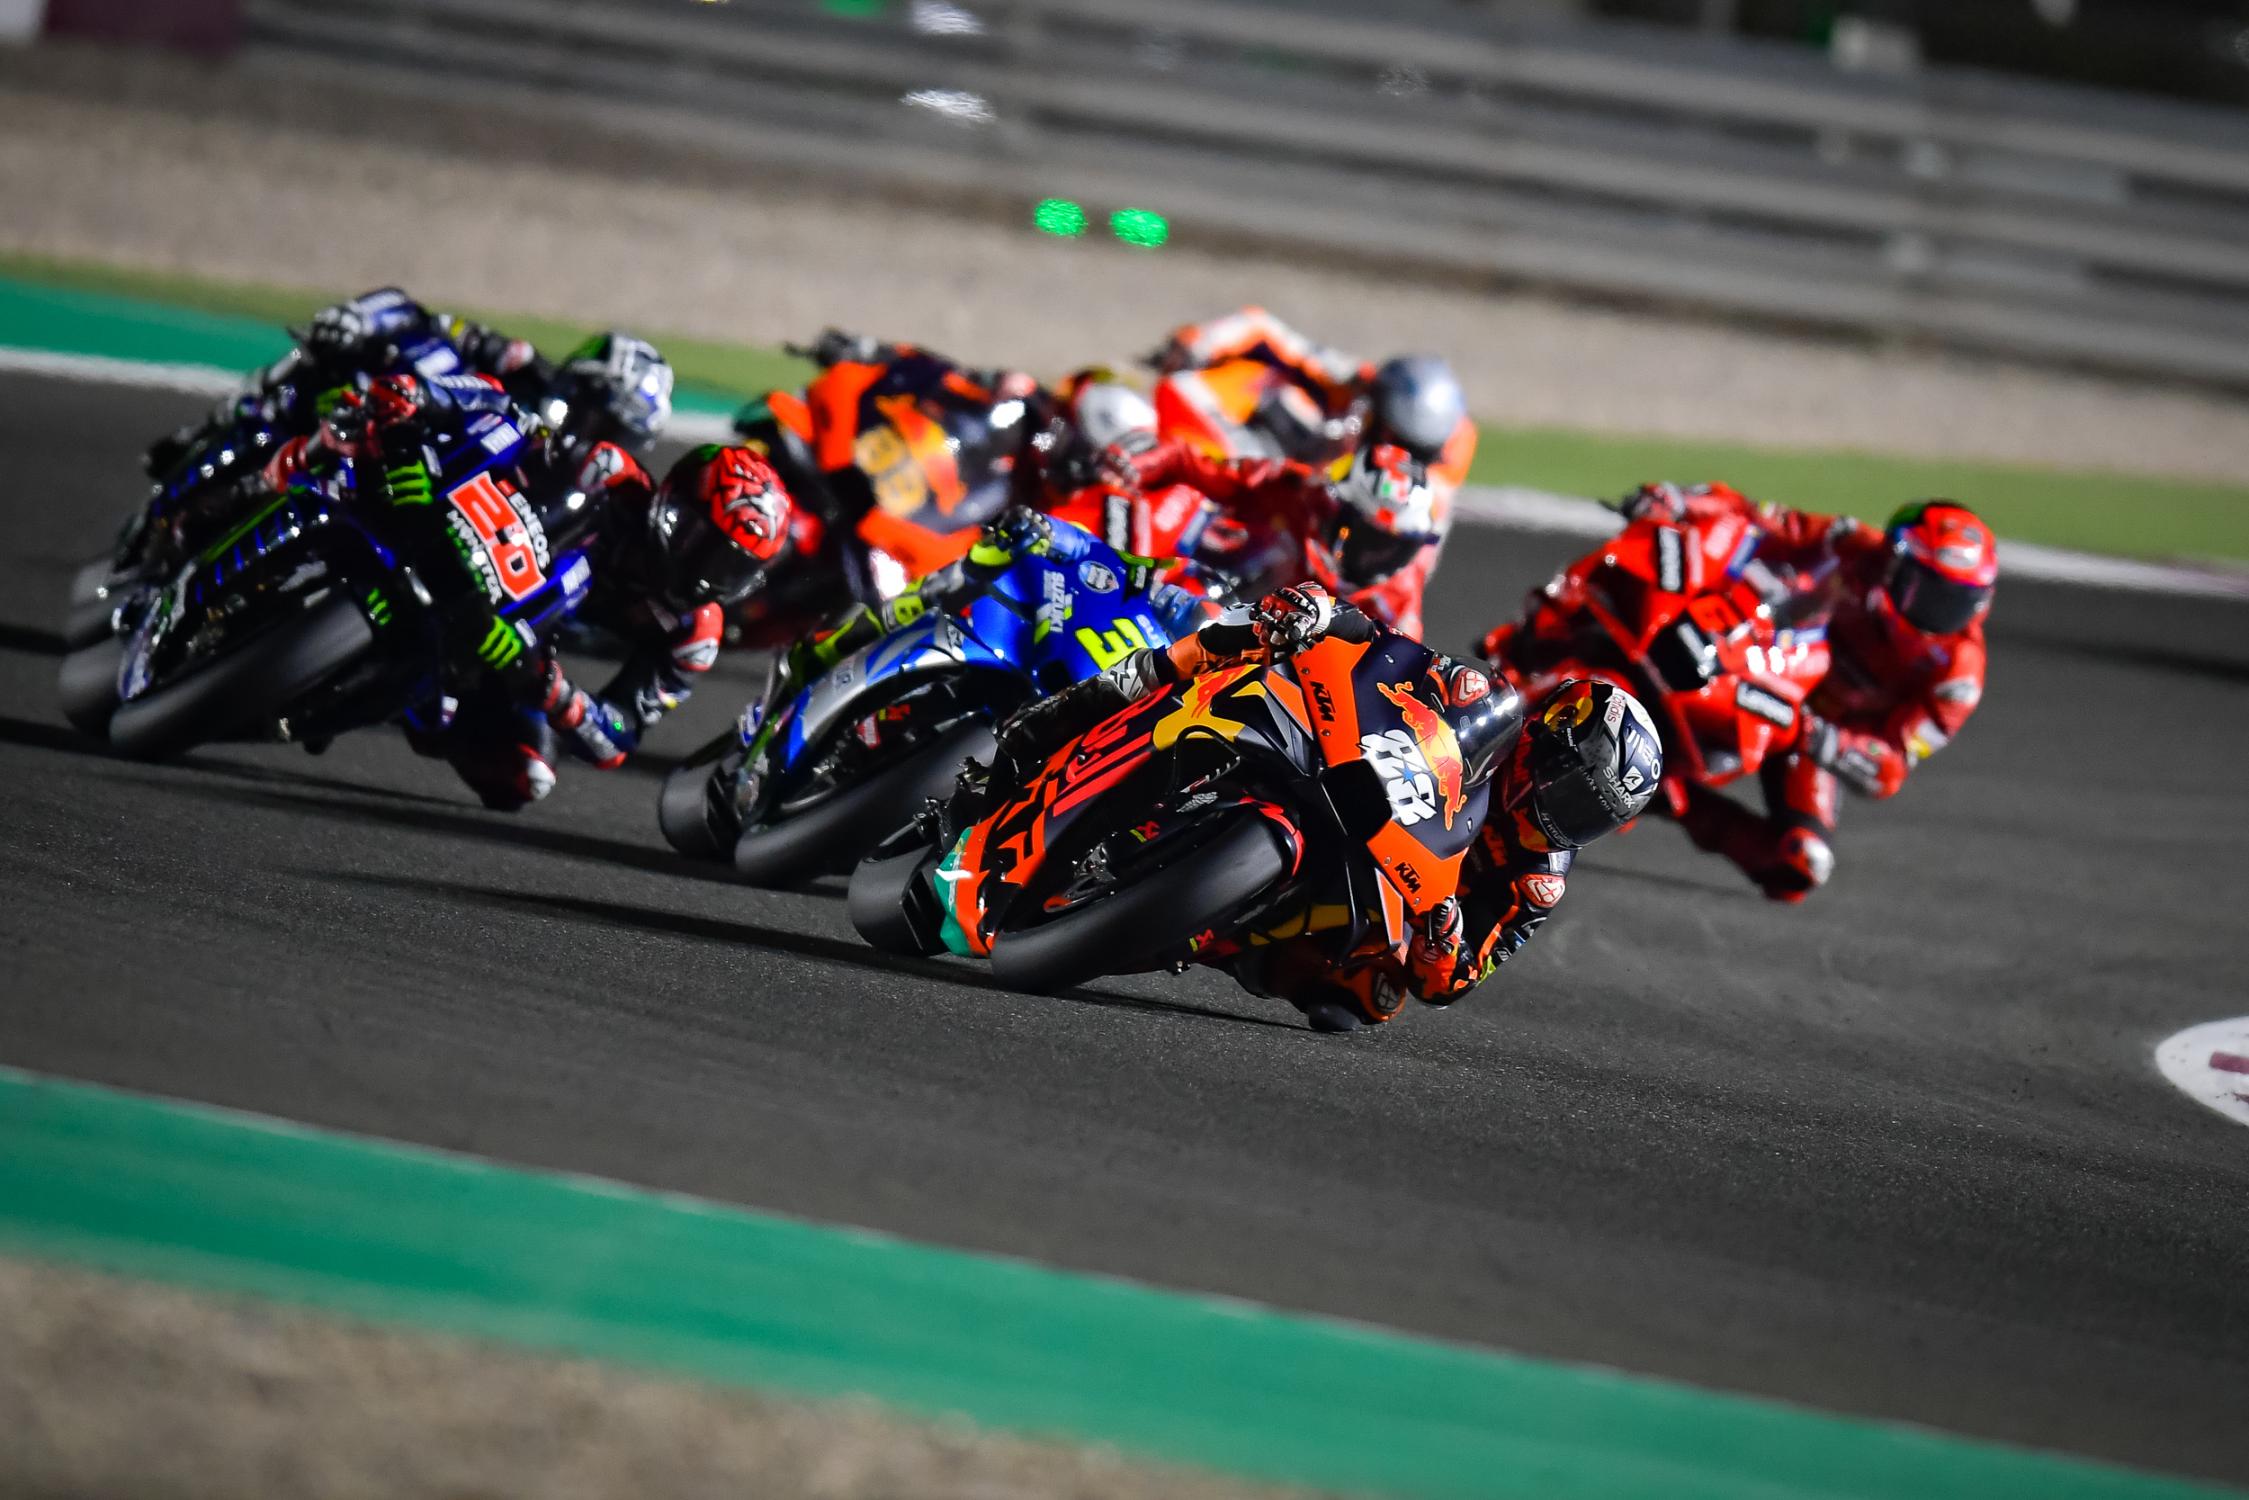 Motogp Race Live Today Starting Grid Positions And Classification Portimao 2021 Ruetir